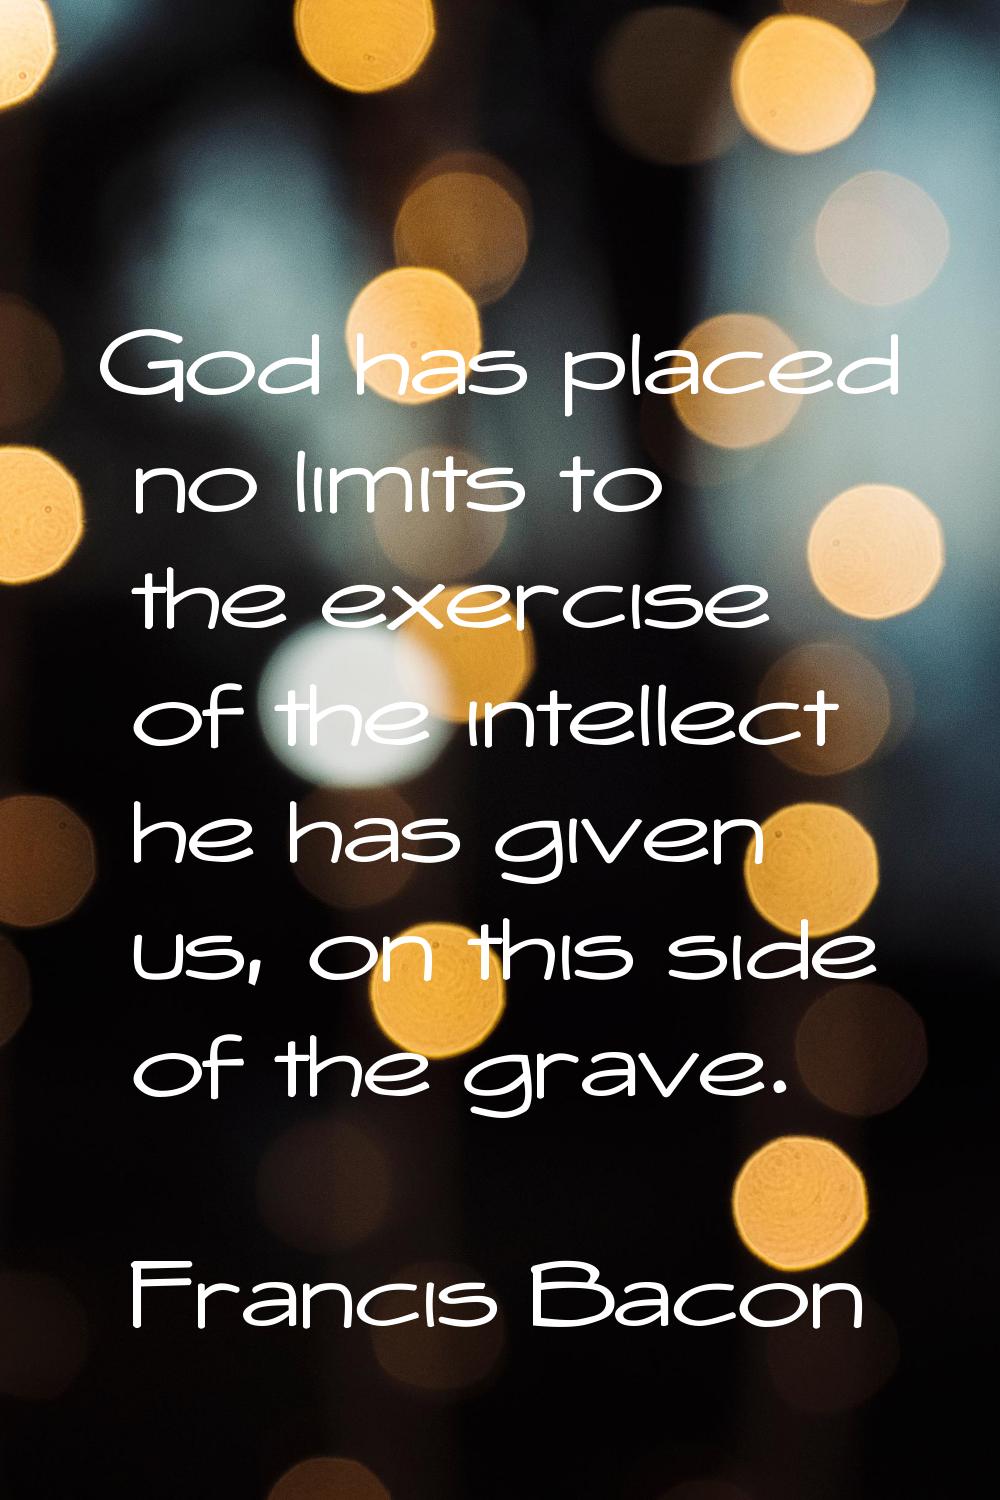 God has placed no limits to the exercise of the intellect he has given us, on this side of the grav